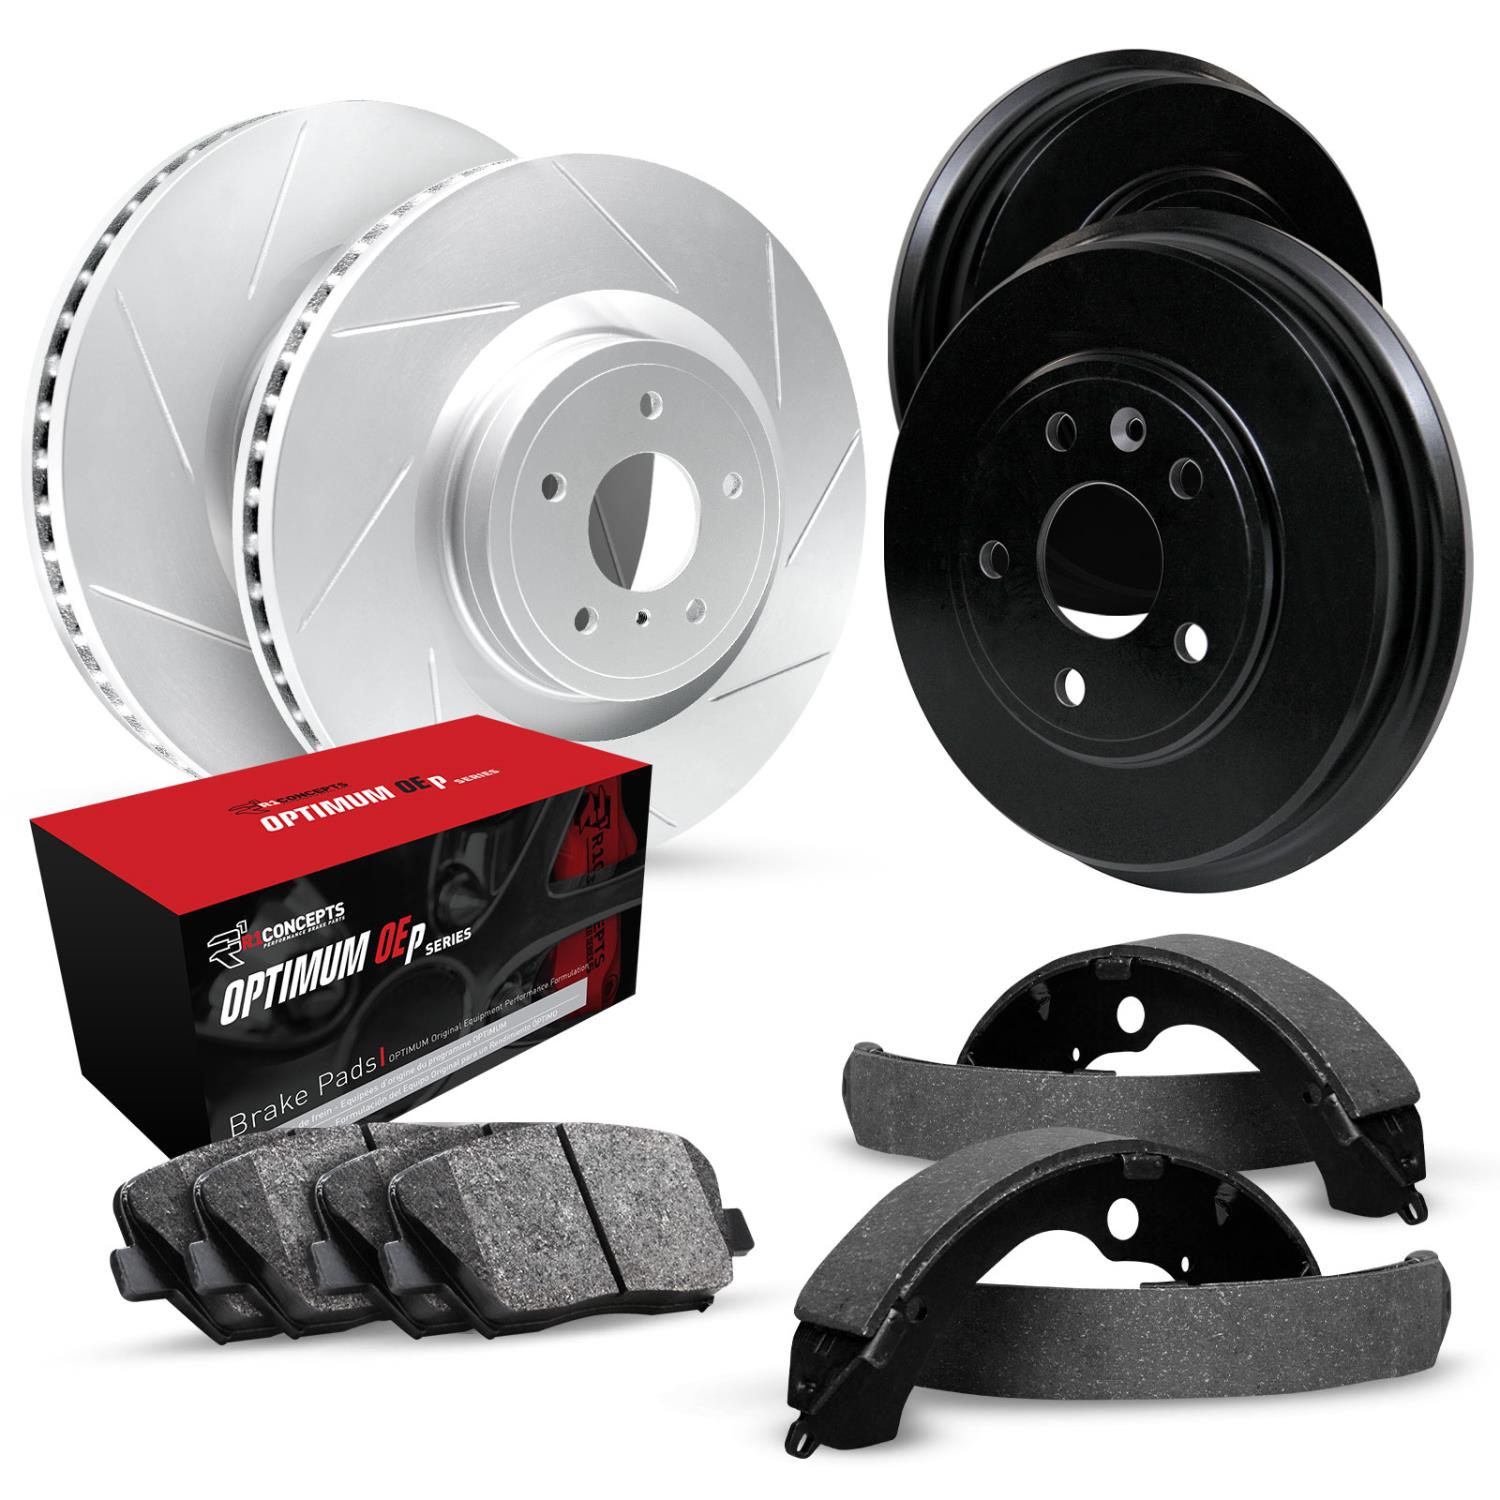 GEO-Carbon Slotted Brake Rotor & Drum Set w/Optimum OE Pads & Shoes, 1978-1980 GM, Position: Front & Rear